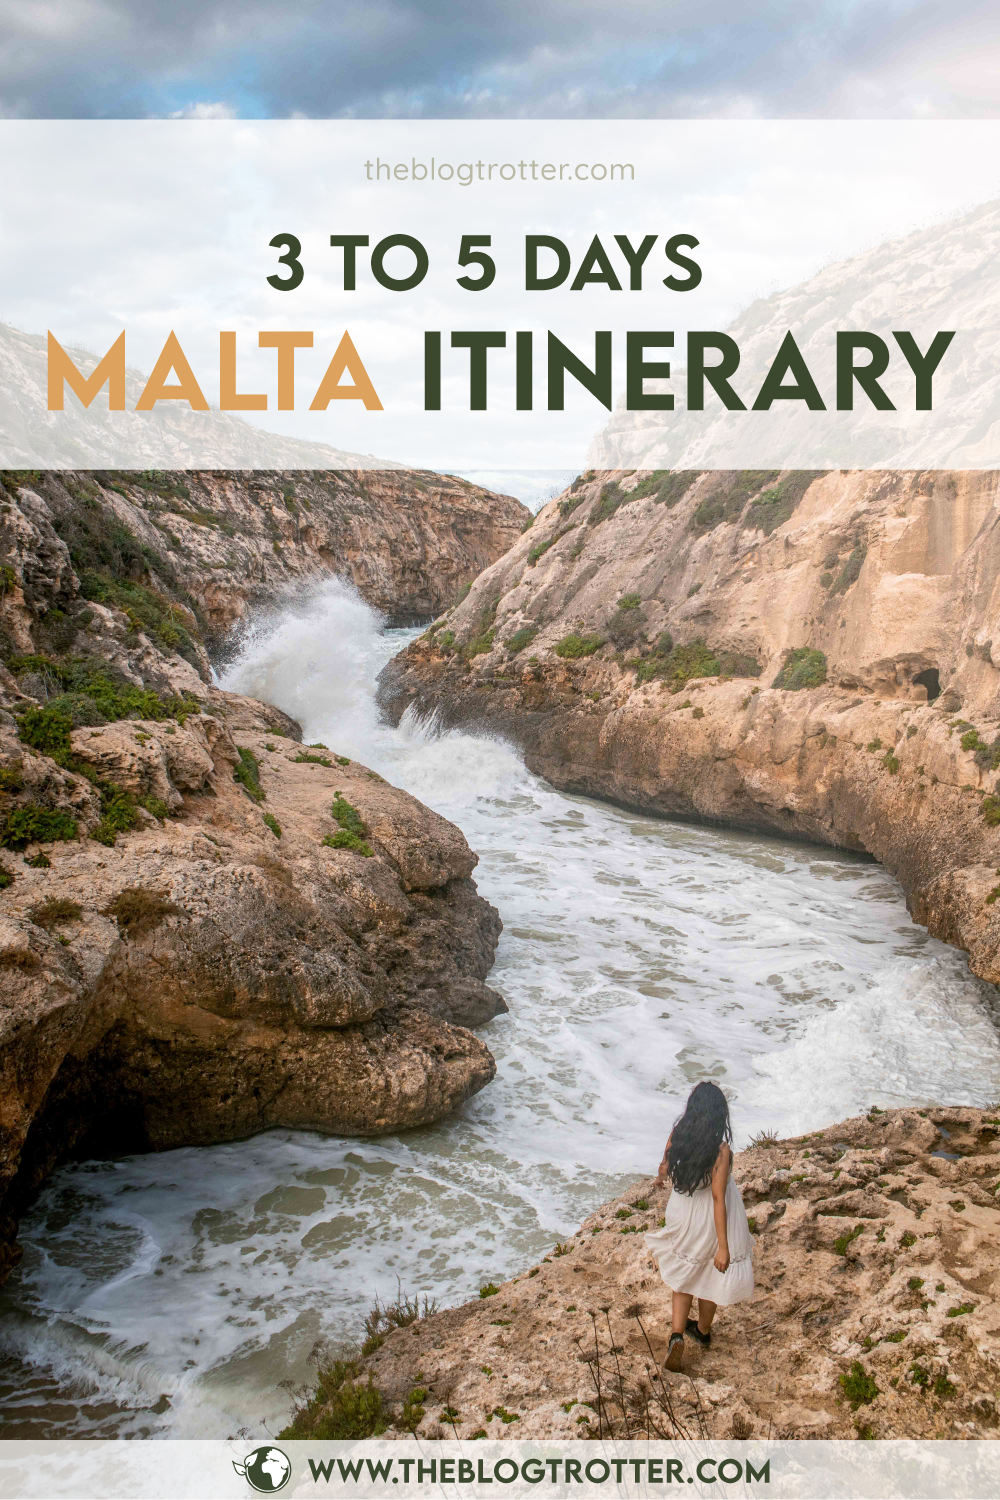 Malta itinerary article visual for Pinterest - Option 1